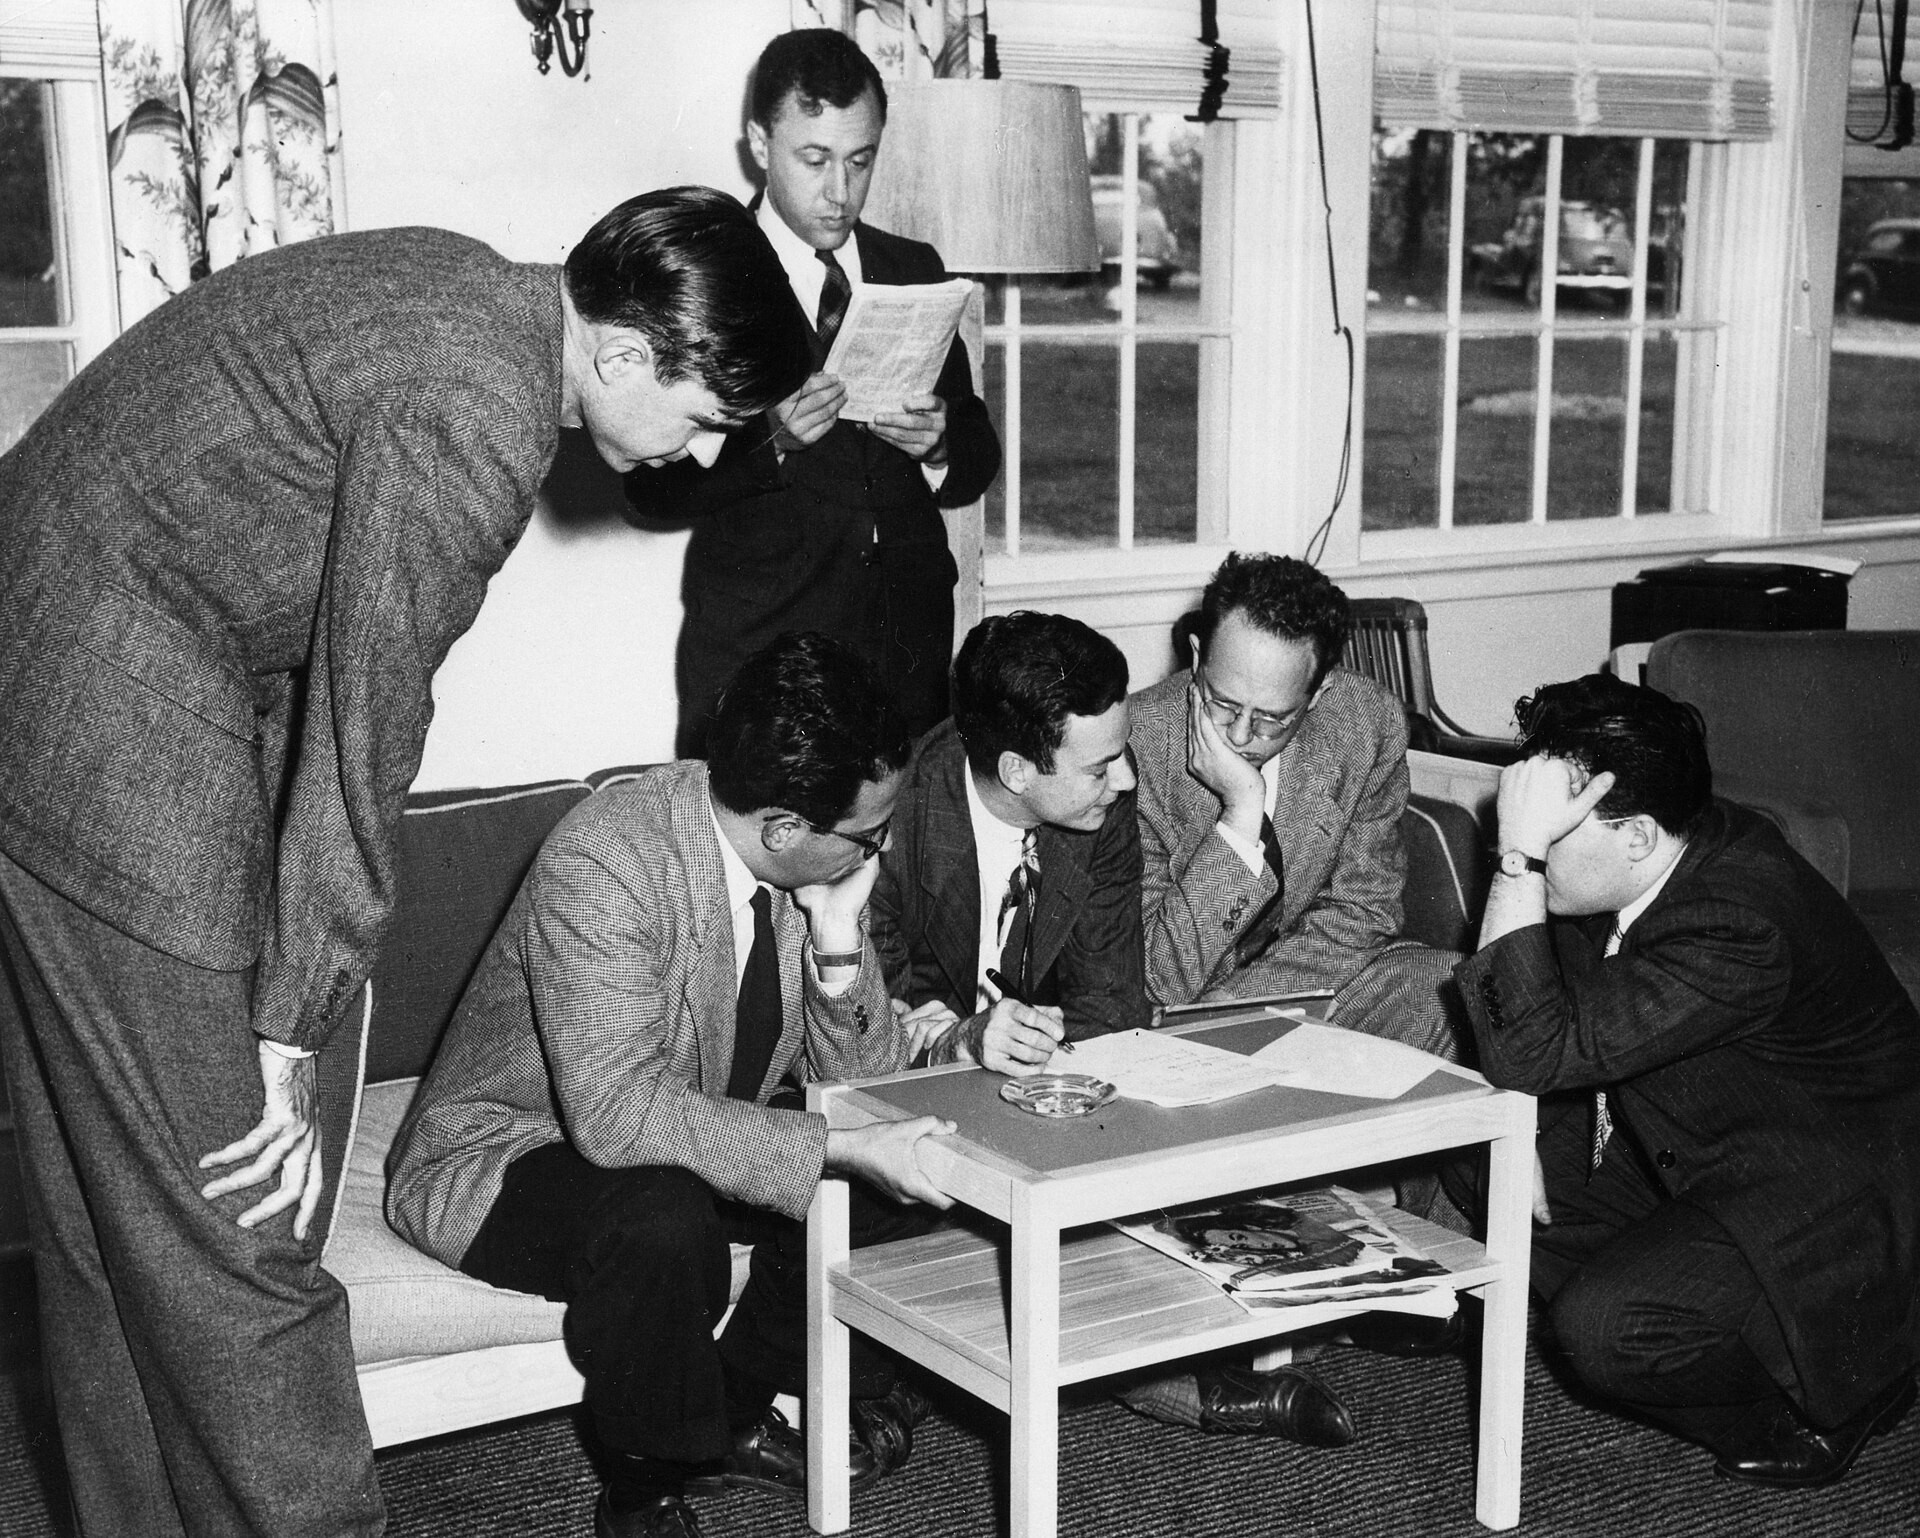 Willis Lamb, Abraham Pais, Richard Feynman, Herman Feshbach and Julian Schwinger dressed in suits with ties and gathered around a small table while deep in discussion during the Shelter Island Conference. 